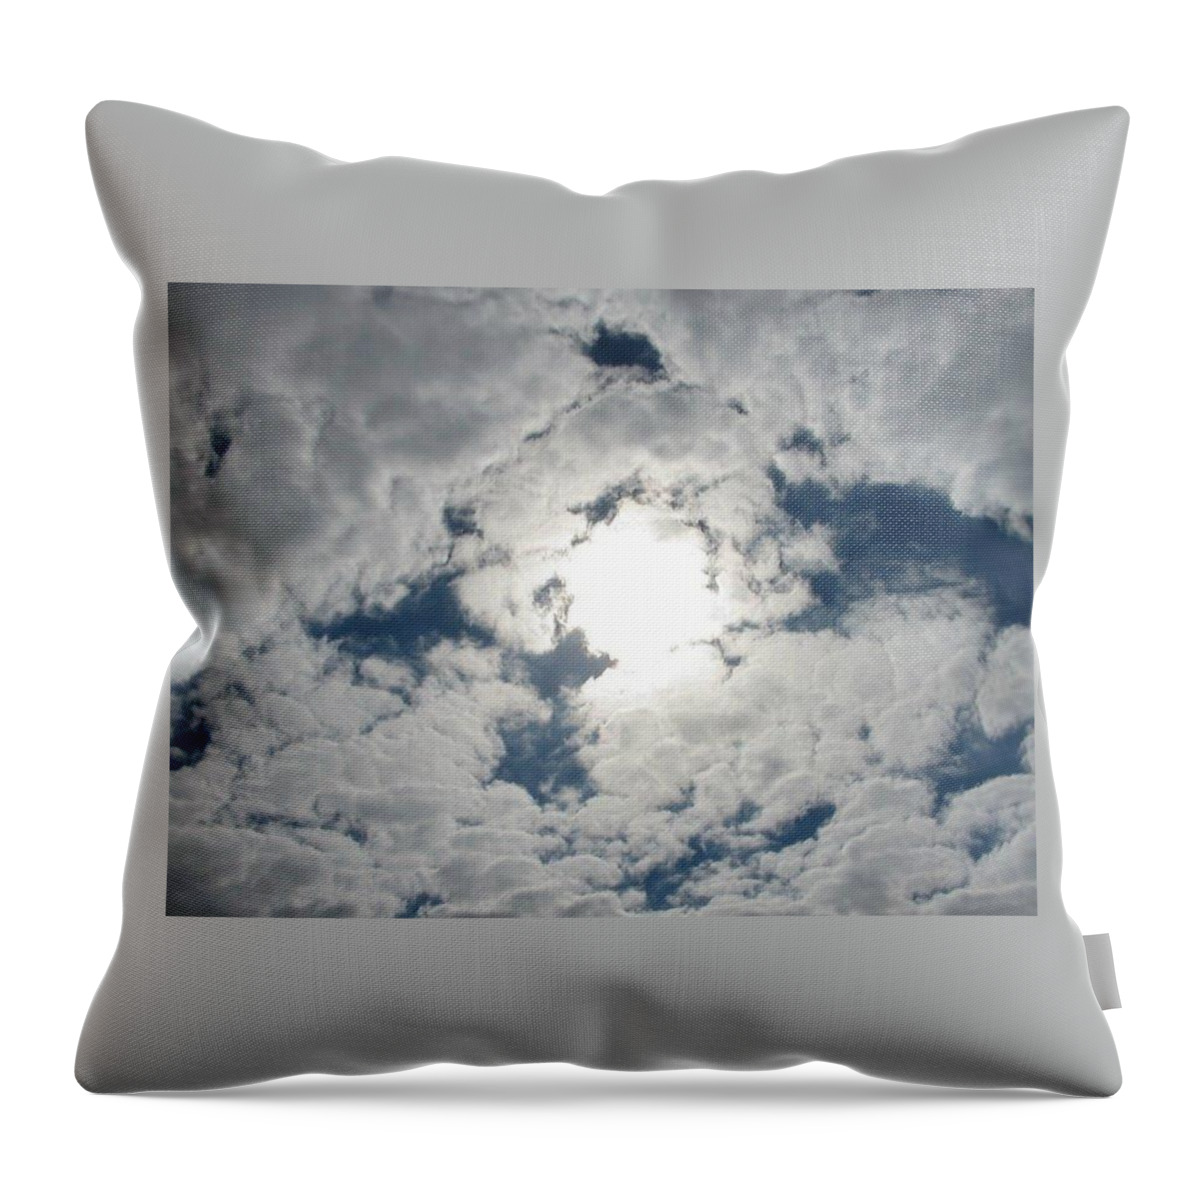 Clouds Throw Pillow featuring the photograph Sun Peek by Deborah Lacoste